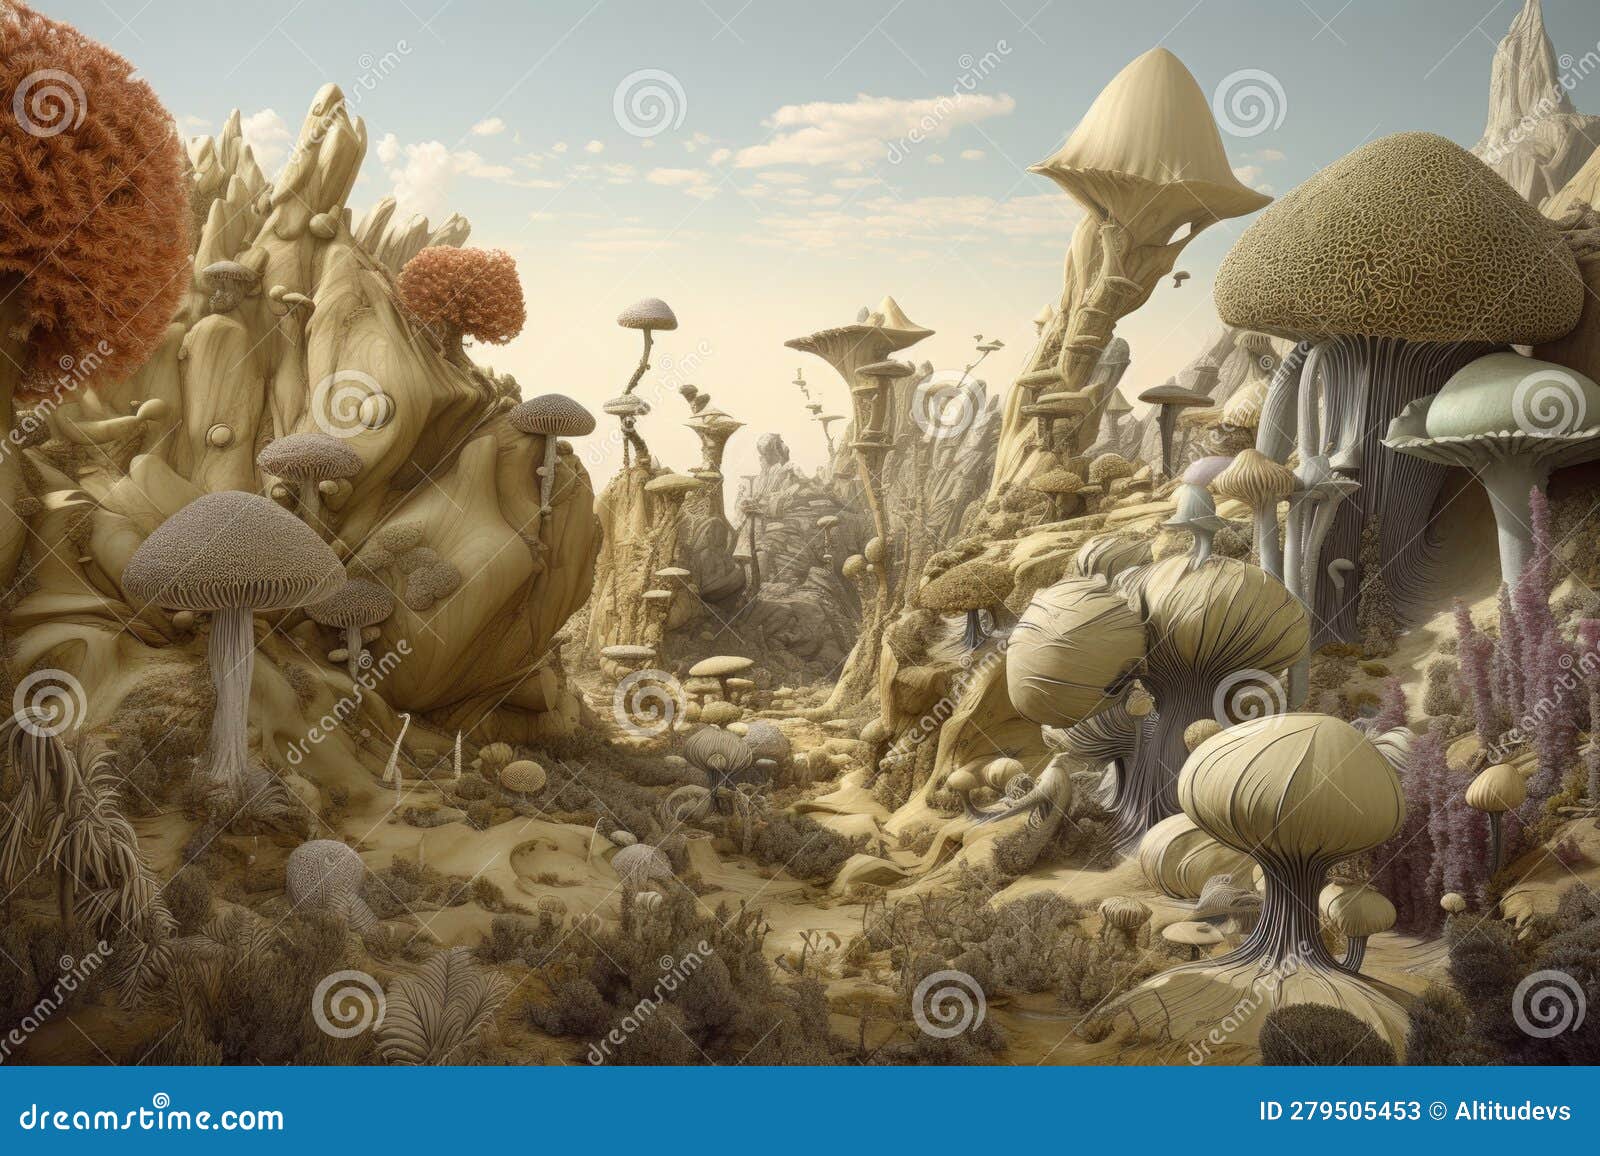 surrealist landscape, with bizarre and otherworldly lifeforms roaming